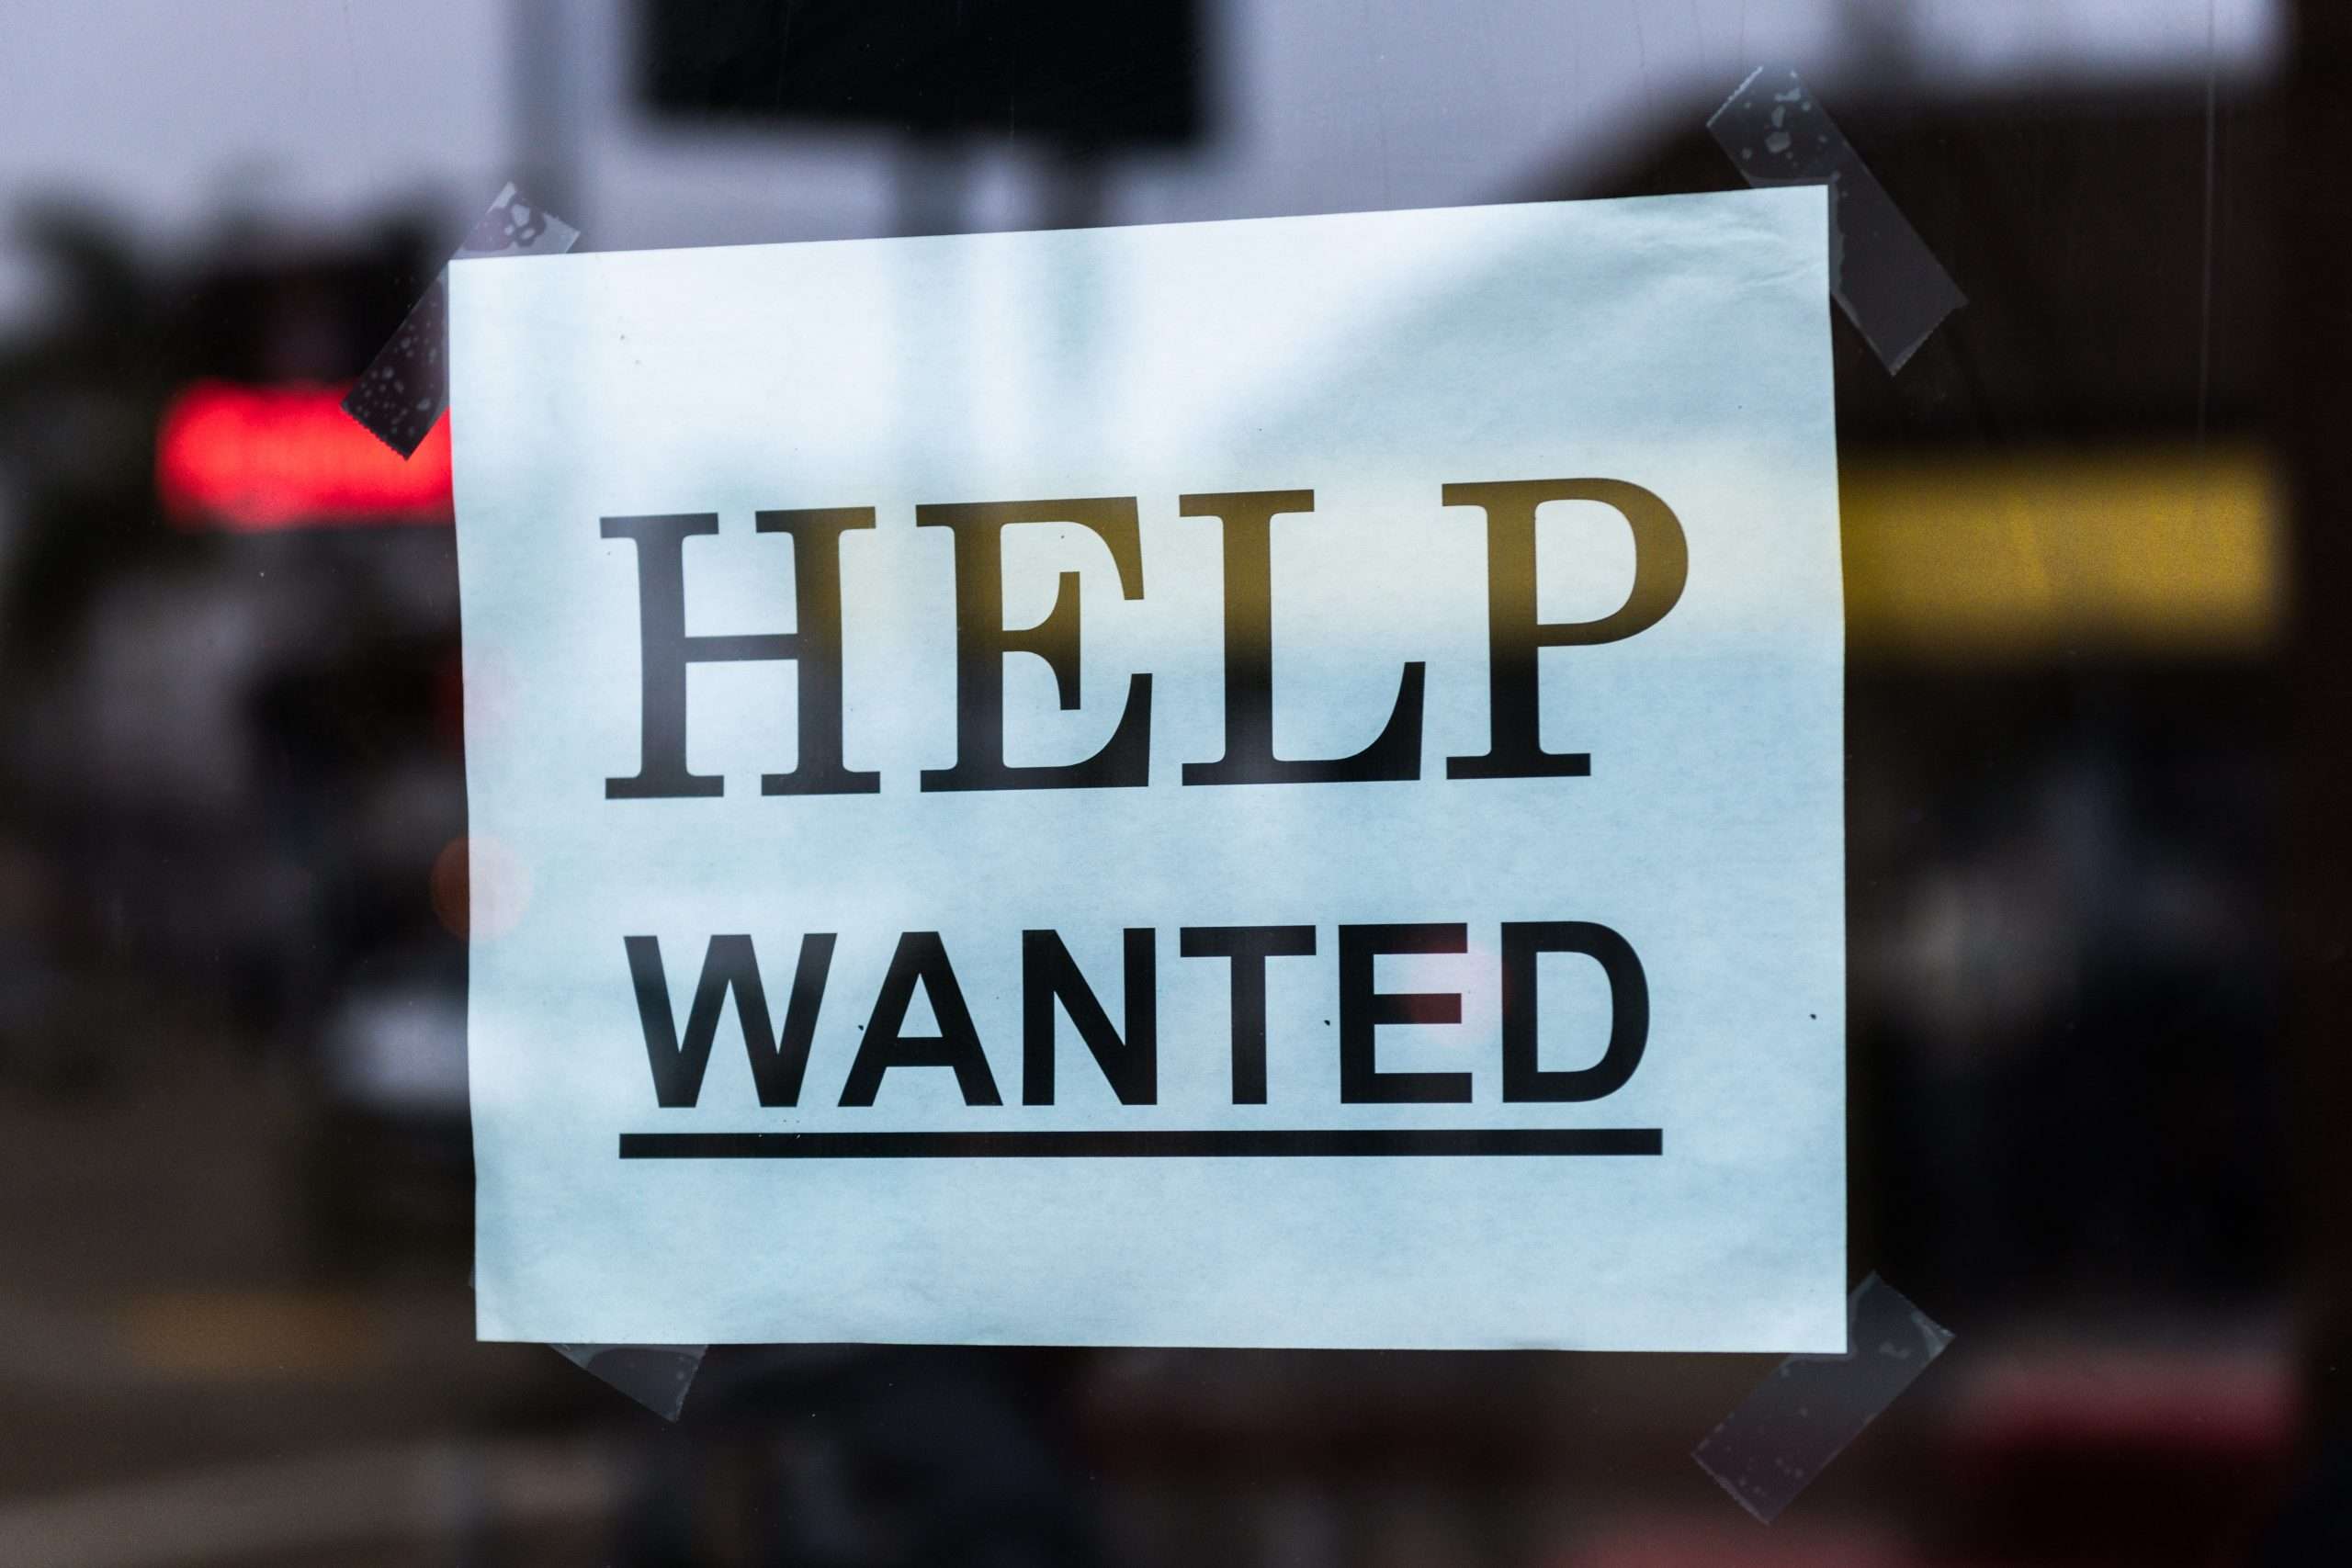 A "Help Wanted" sign posted in a window.